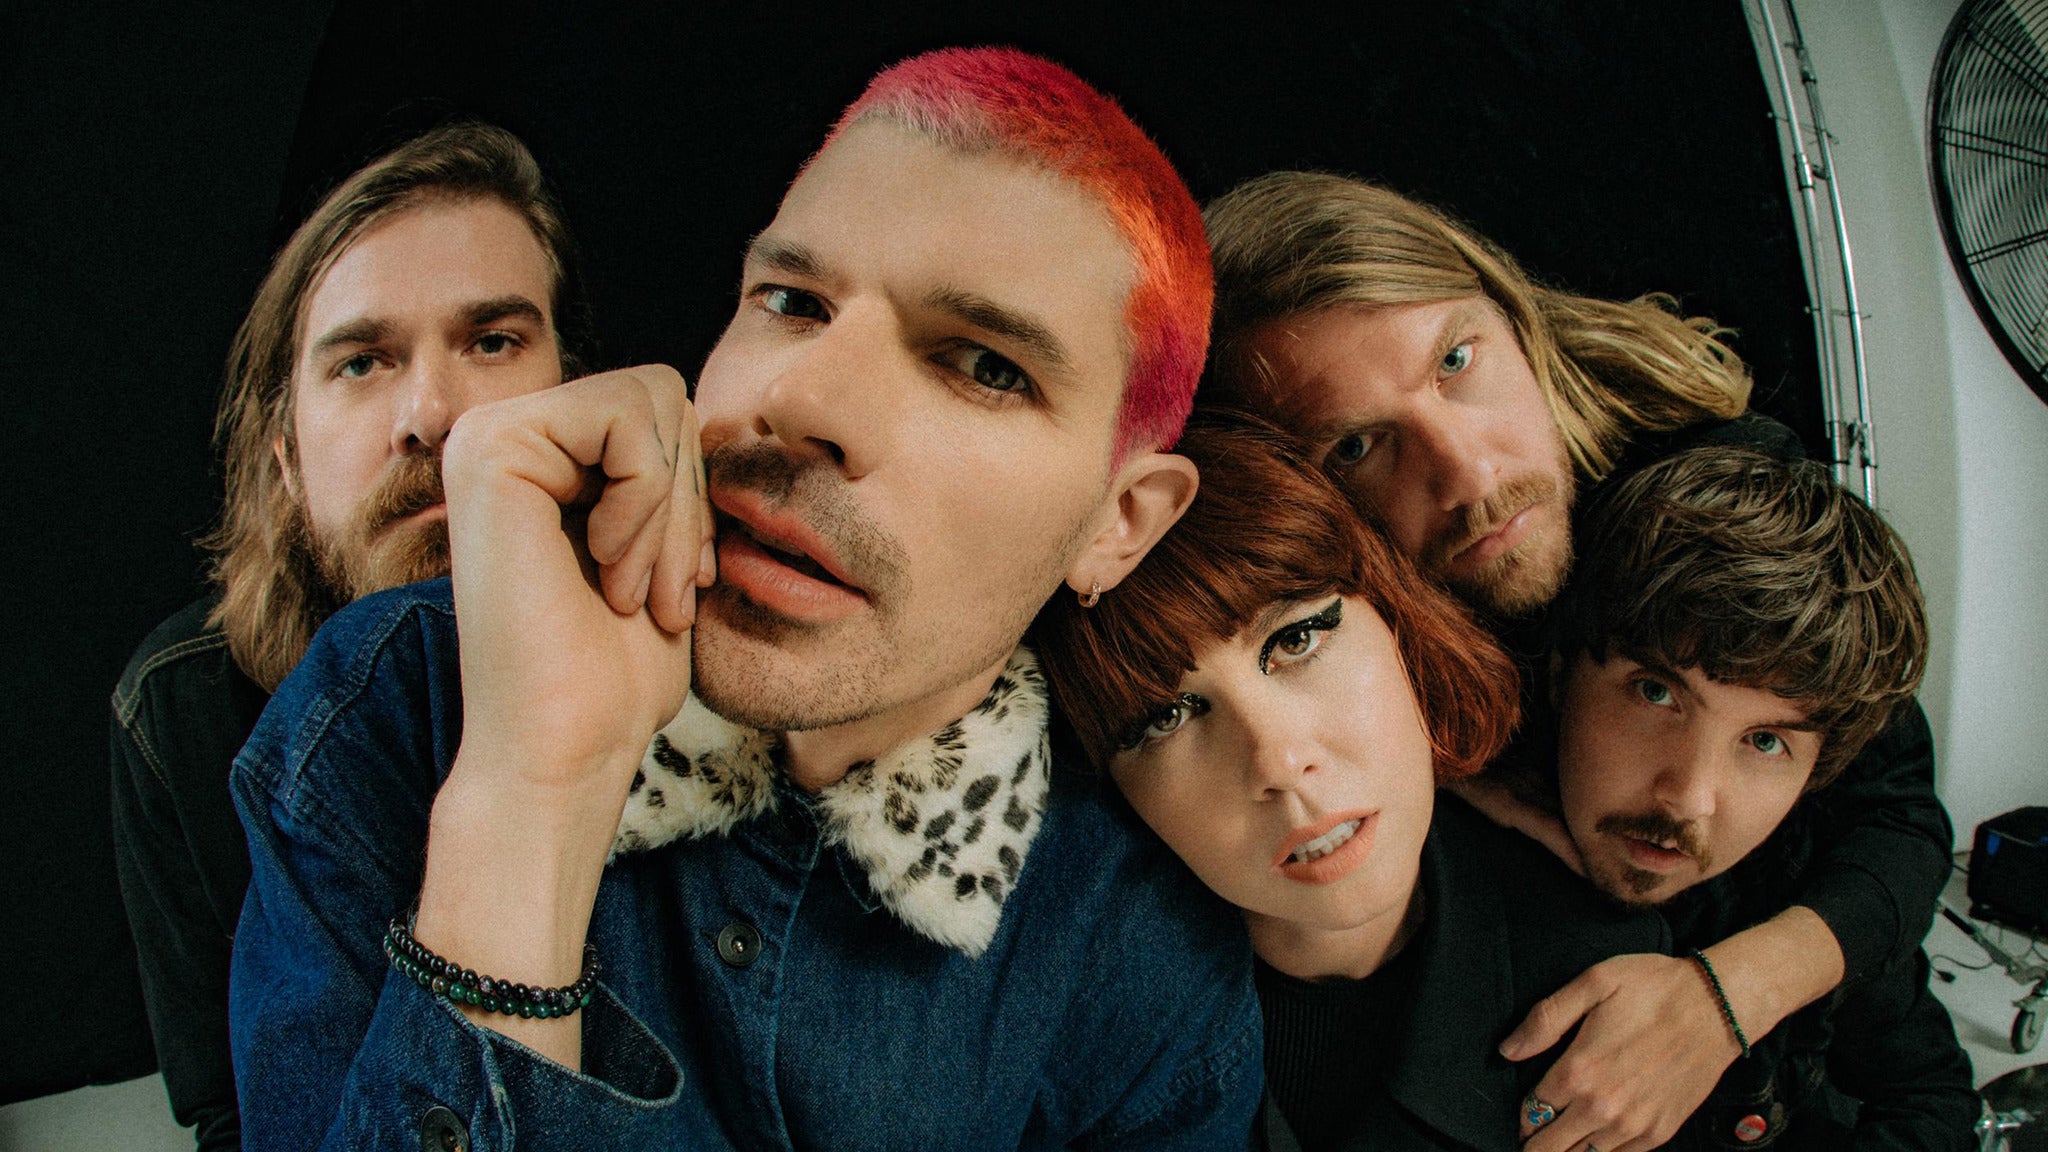 Grouplove - Never Trust A Happy Song 10th Anniversary pre-sale password